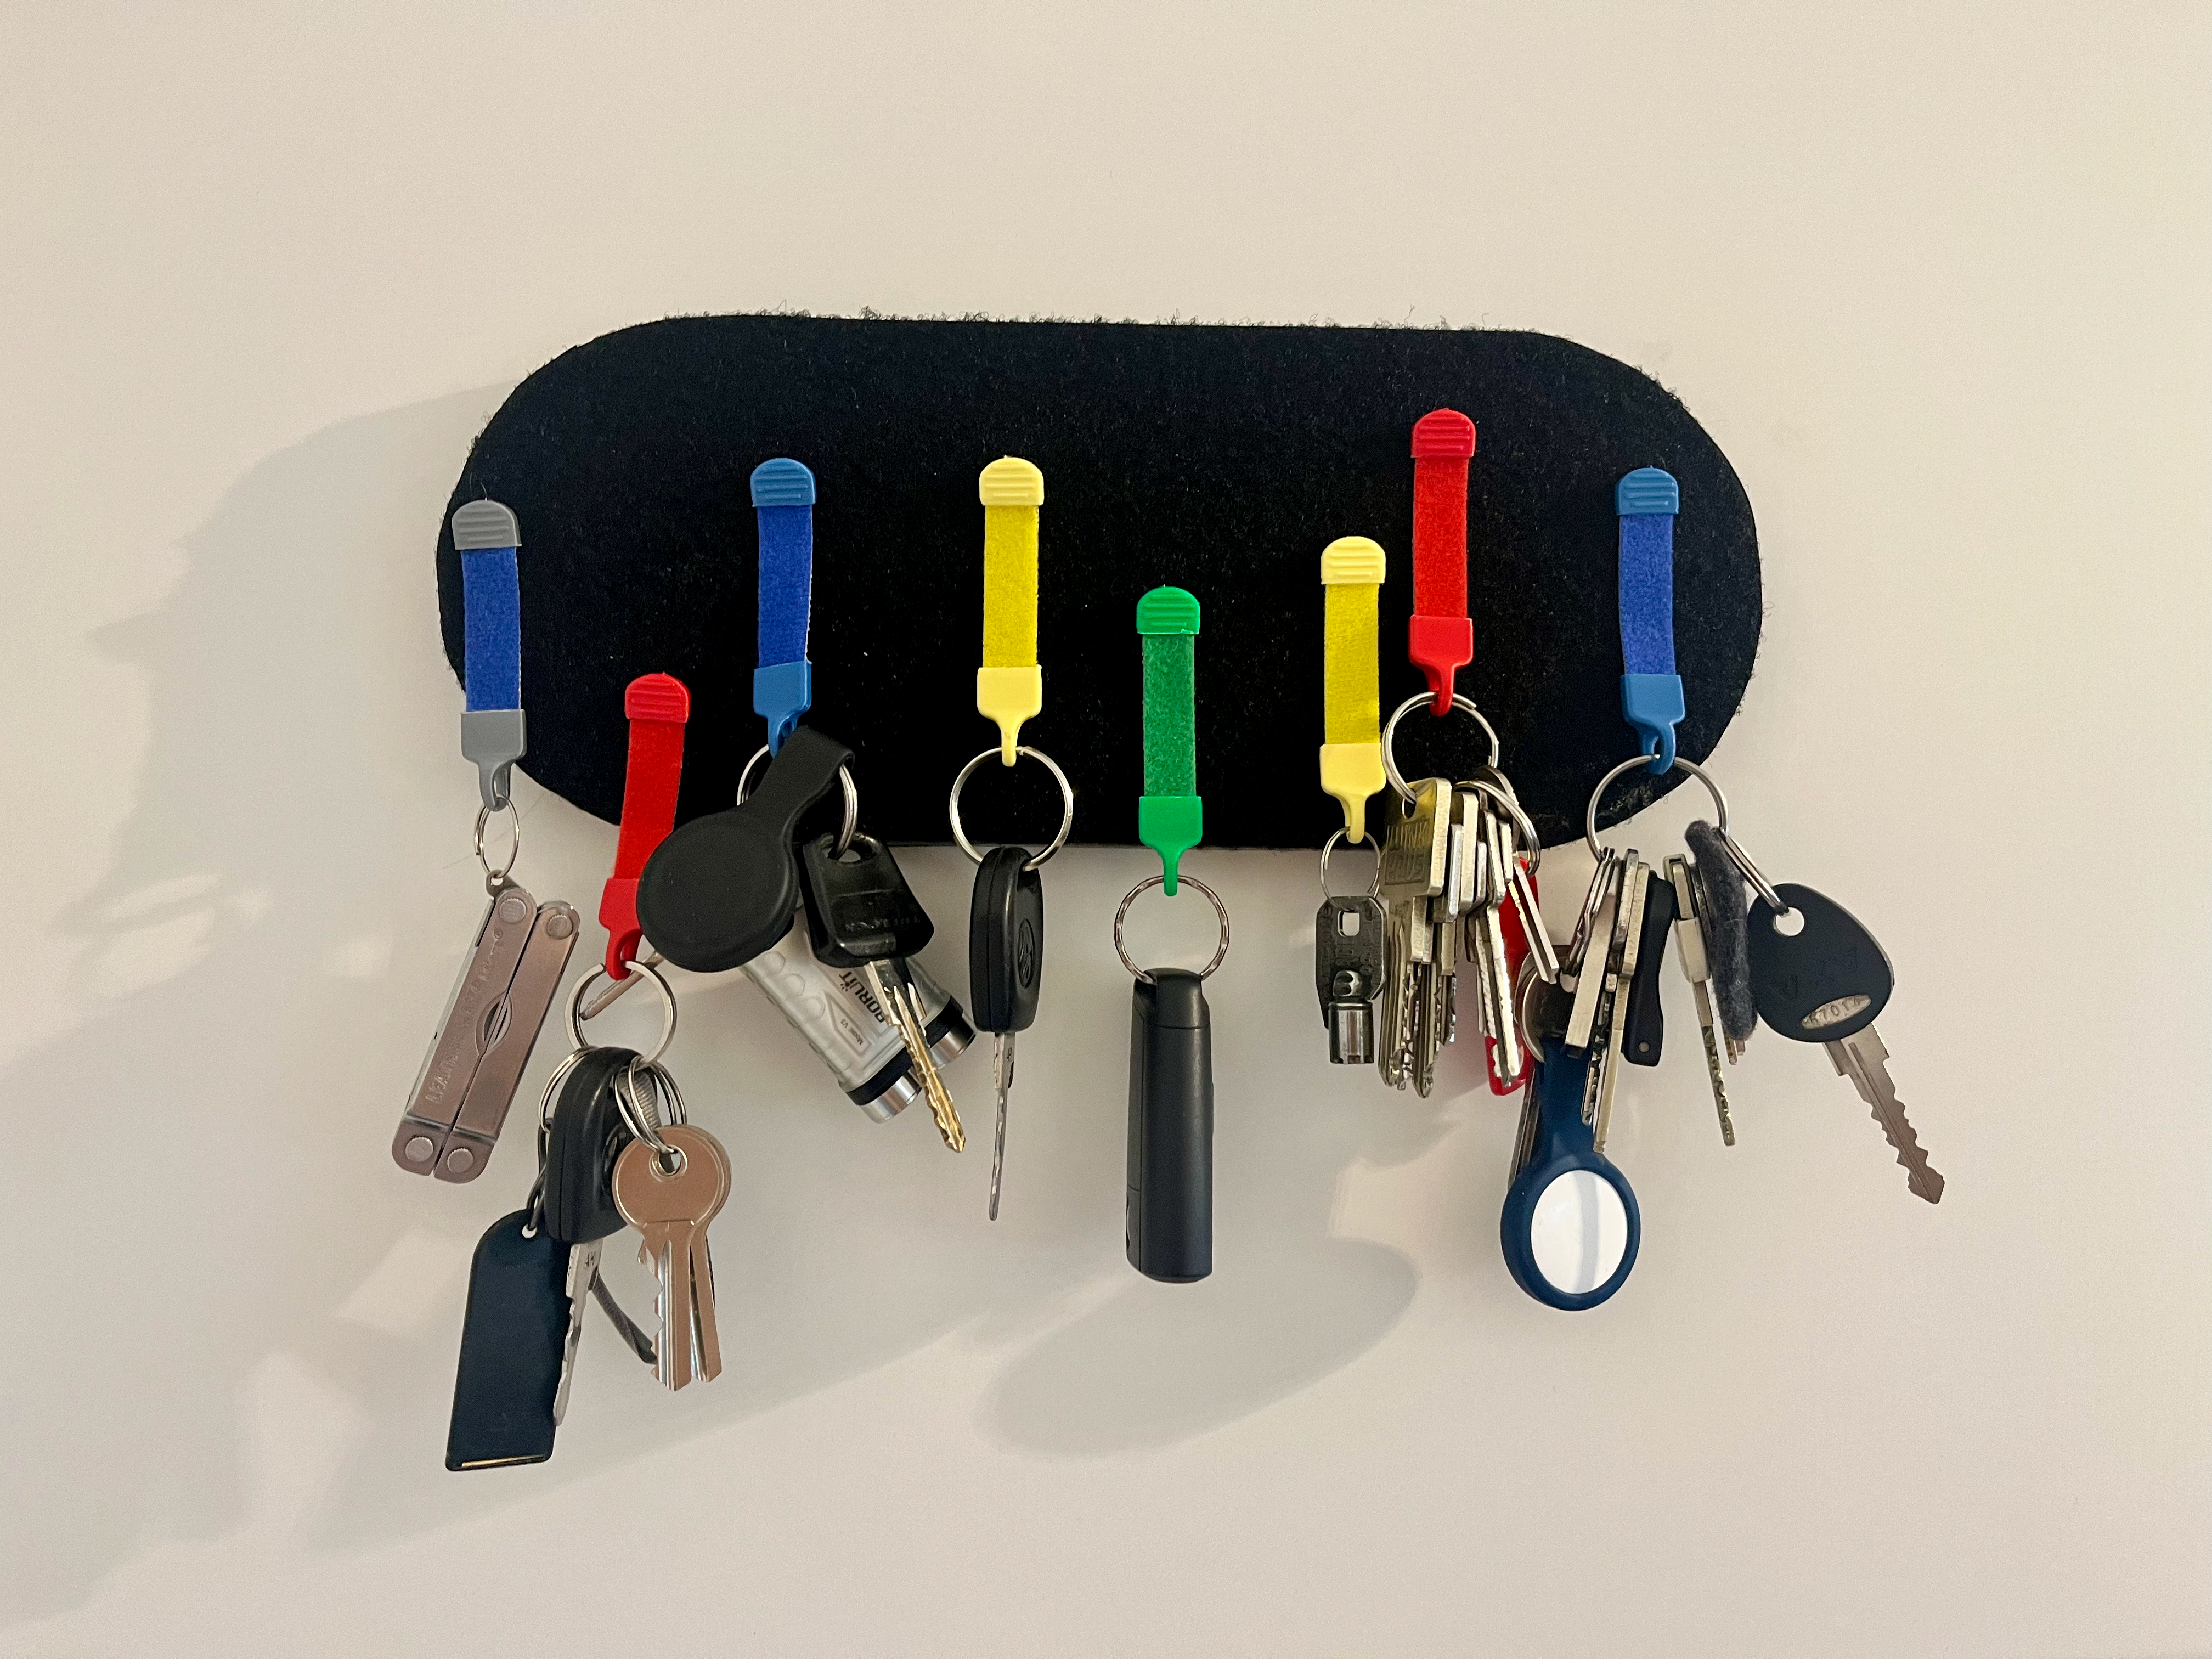 Expansive Carabiner Key Organizers : clip keychain